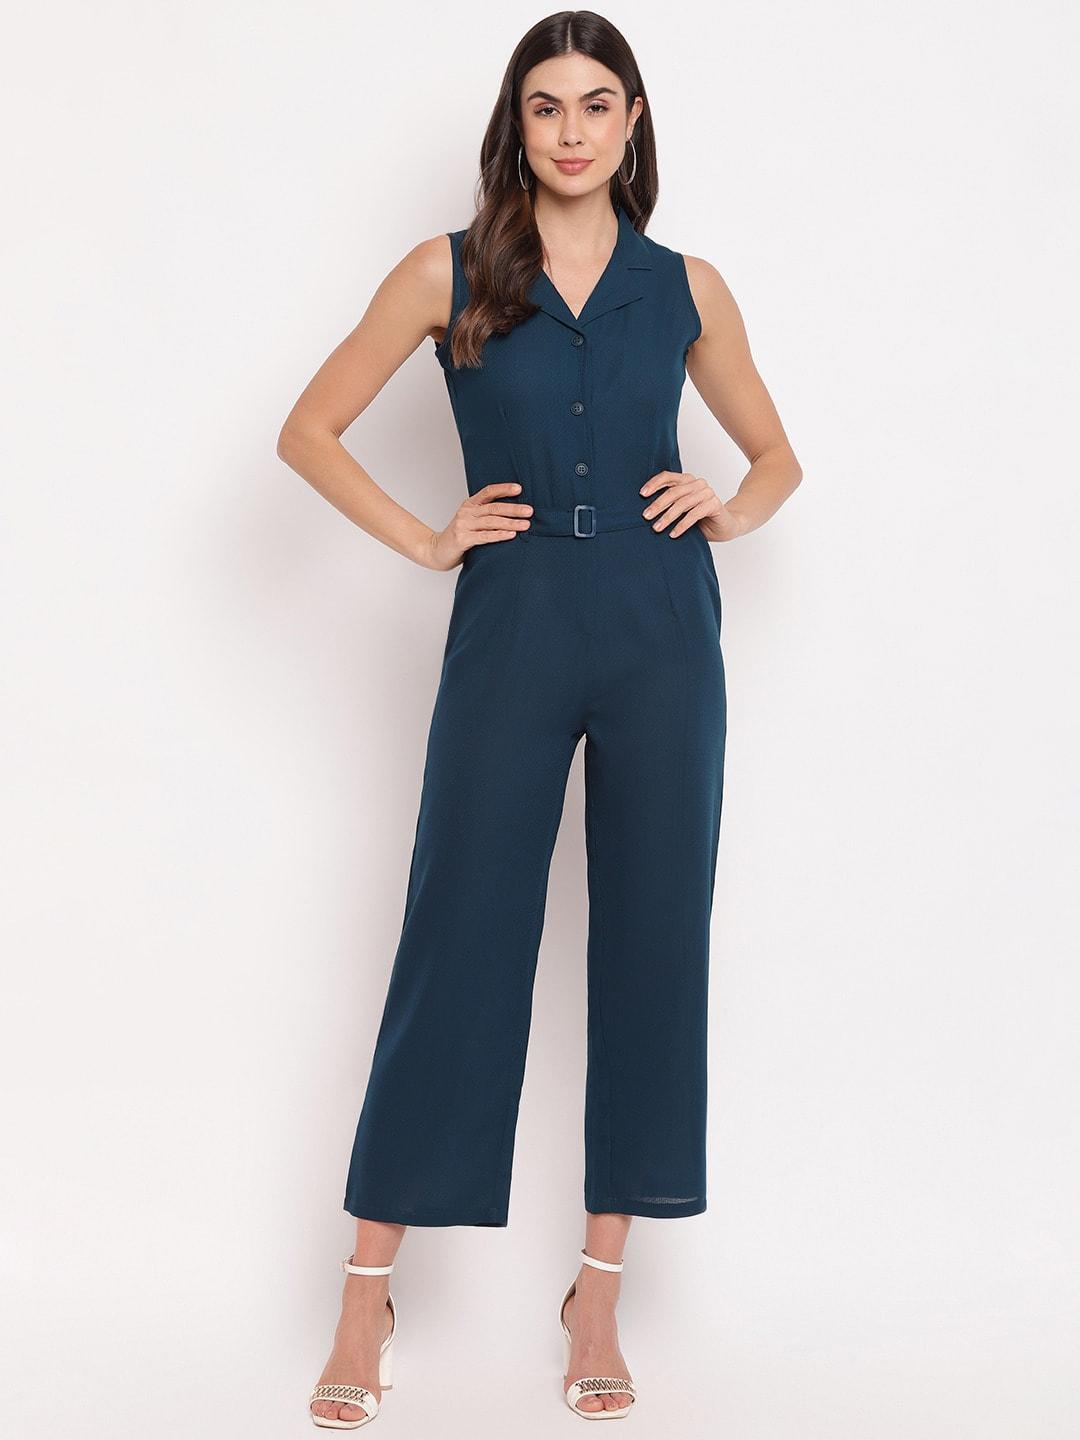 mayra-women-teal-blue-solid-basic-jumpsuit